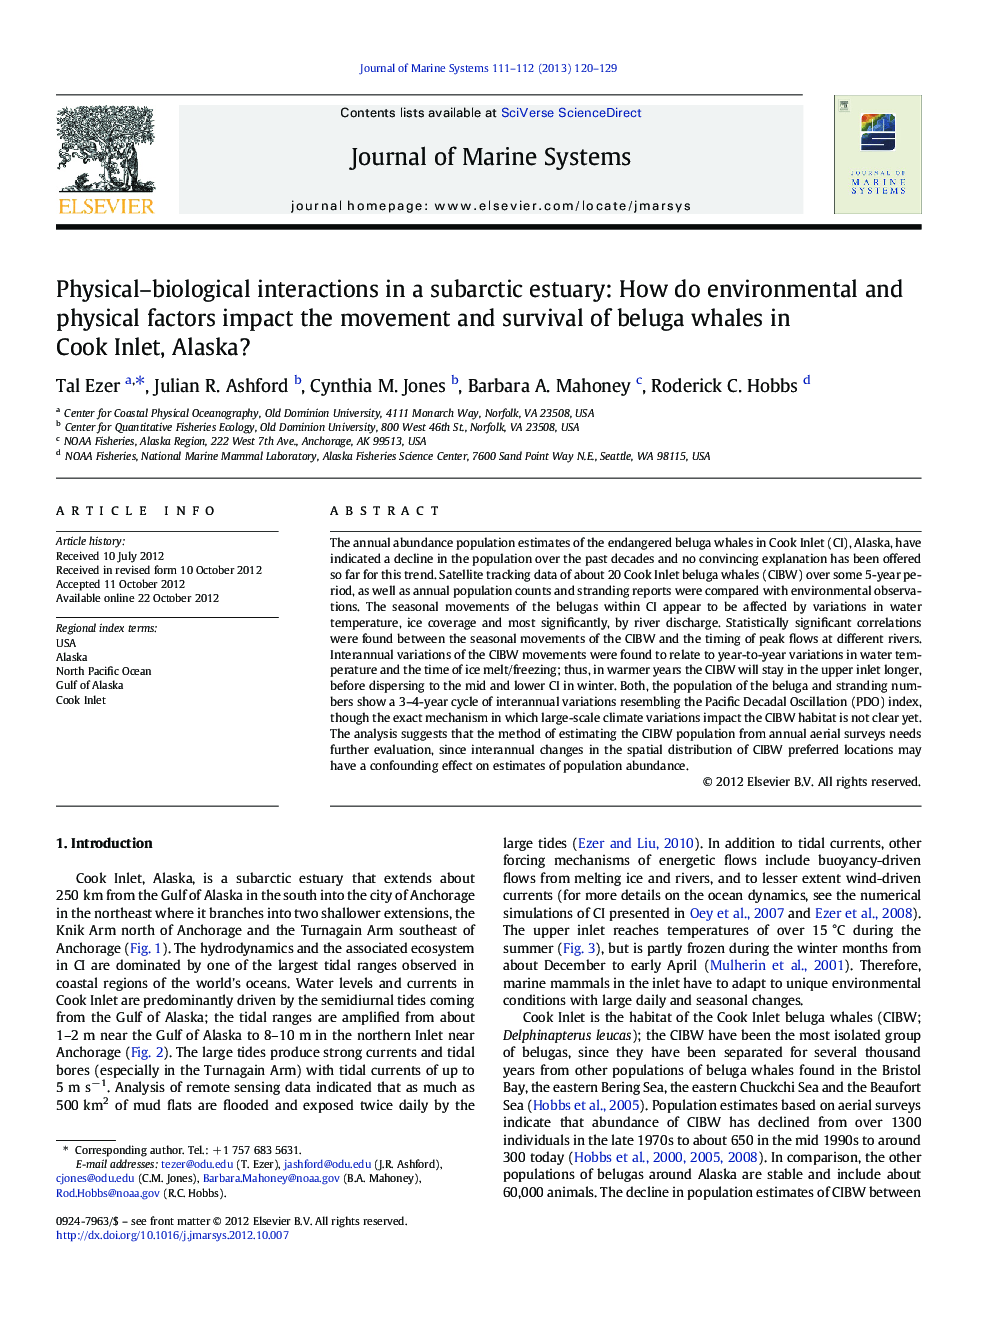 Physical–biological interactions in a subarctic estuary: How do environmental and physical factors impact the movement and survival of beluga whales in Cook Inlet, Alaska?